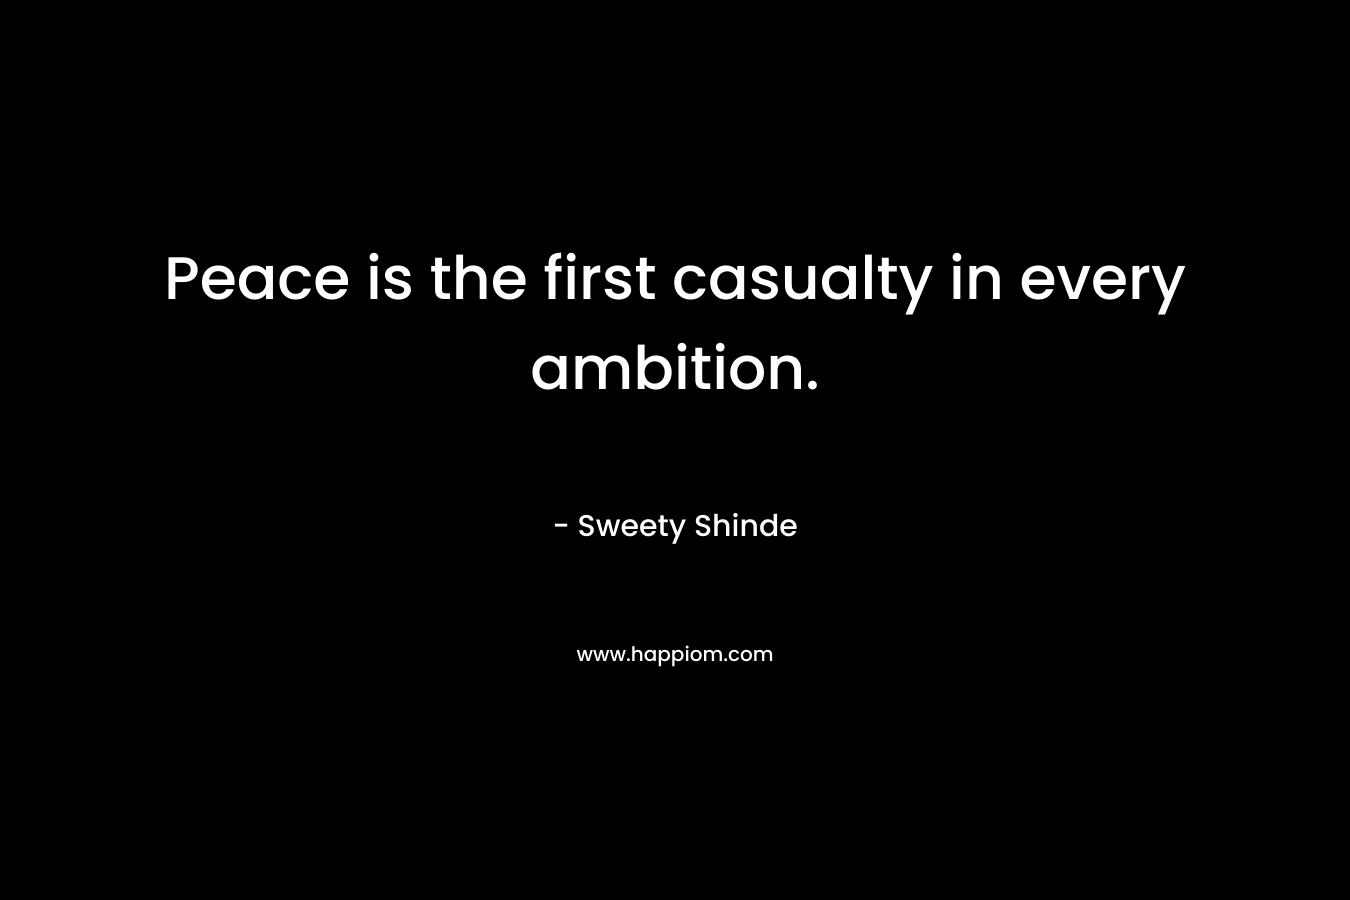 Peace is the first casualty in every ambition.